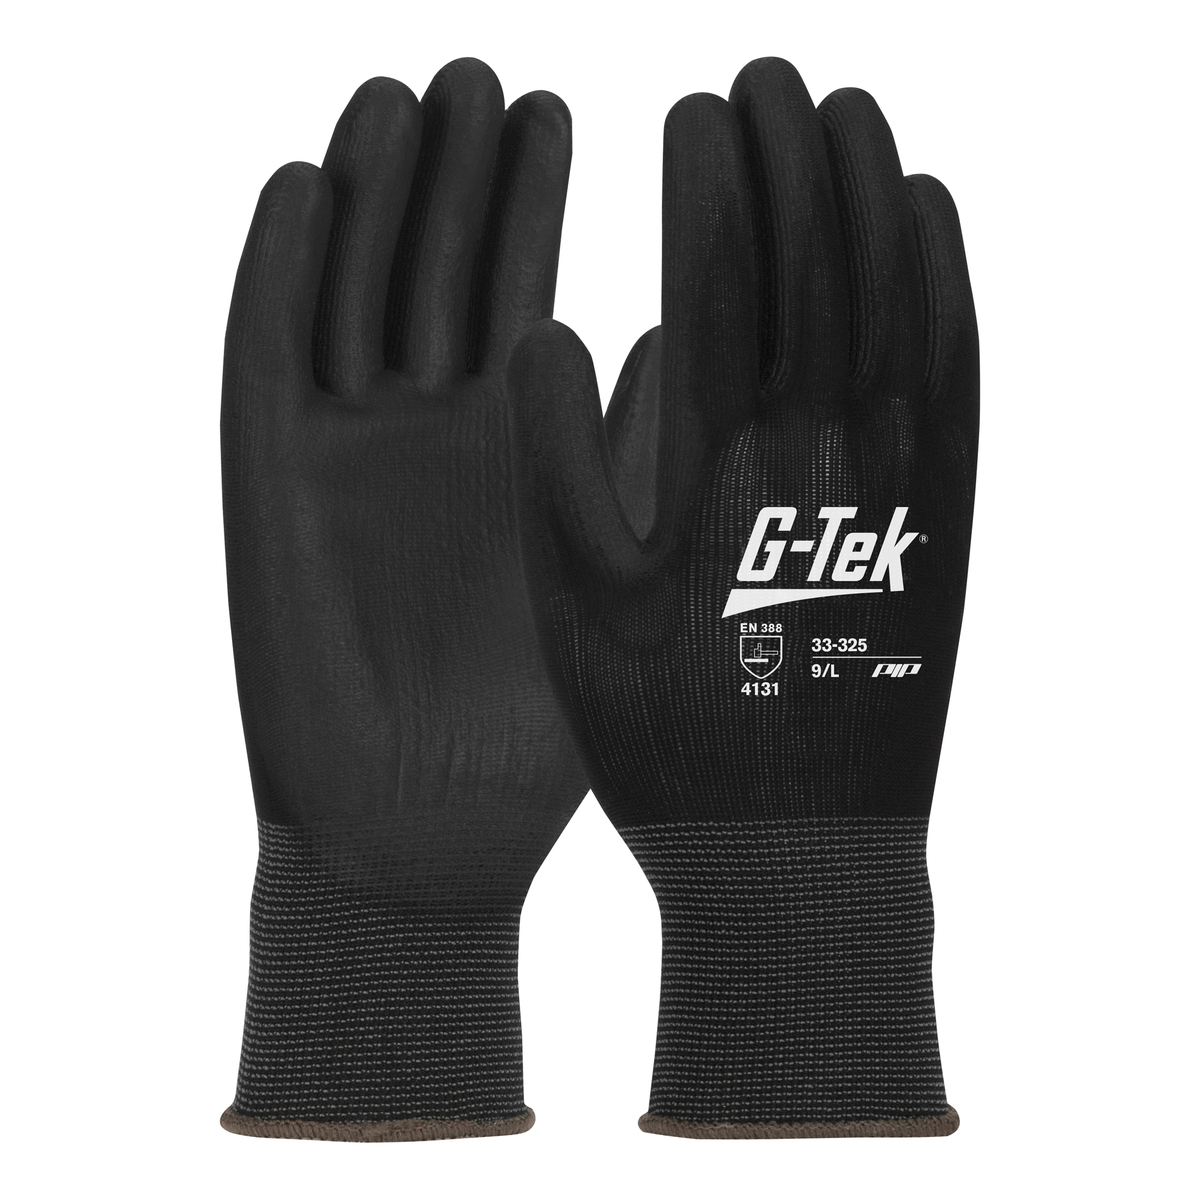 PIP® Small G-Tek® 13 Gauge Black Polyurethane Palm And Finger Coated Work Gloves With Nylon Liner And Continuous Knit Wrist